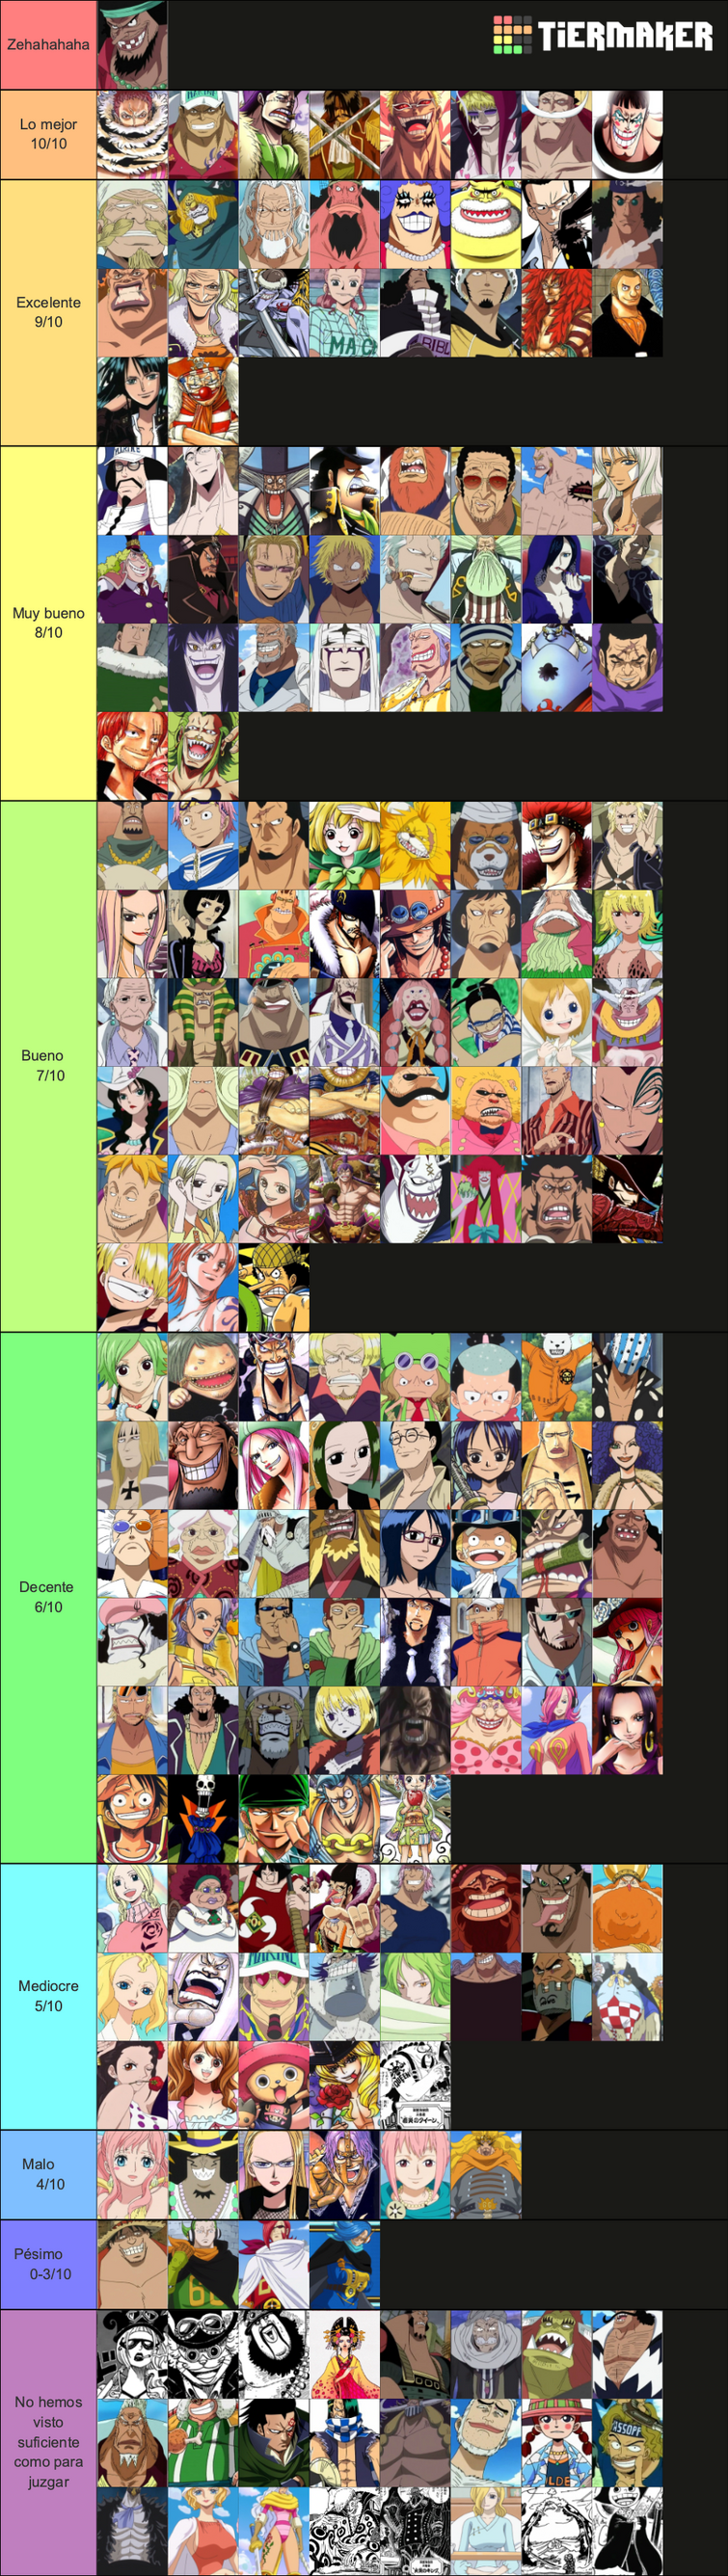 Just tier lists.